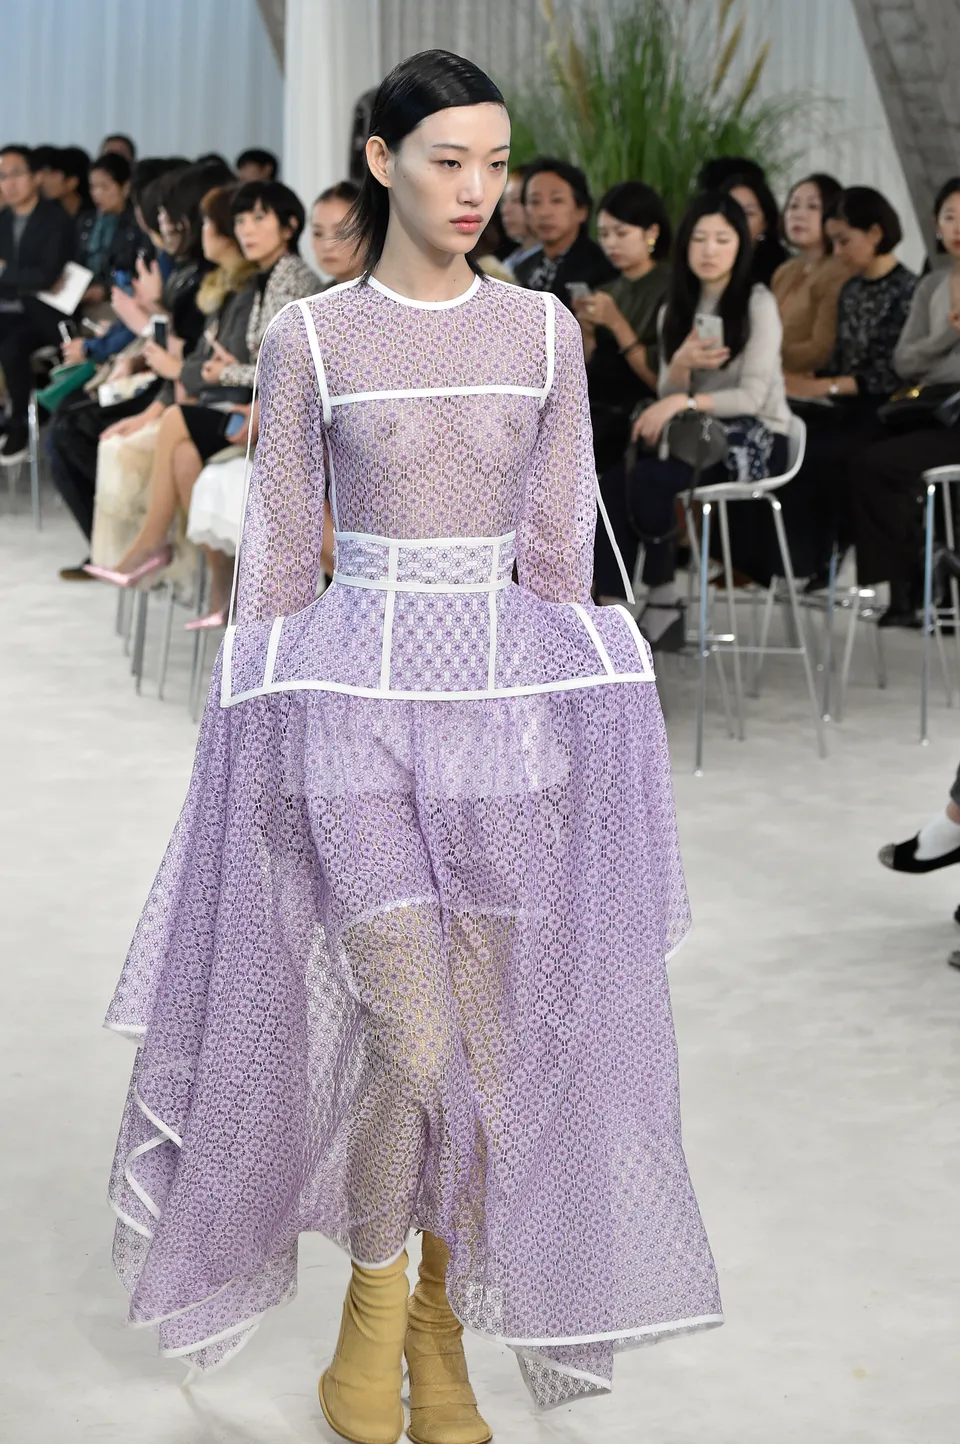 TRUE apotek Sund mad 35 Of The Most Beautiful Dresses At Paris Fashion Week | HuffPost Life